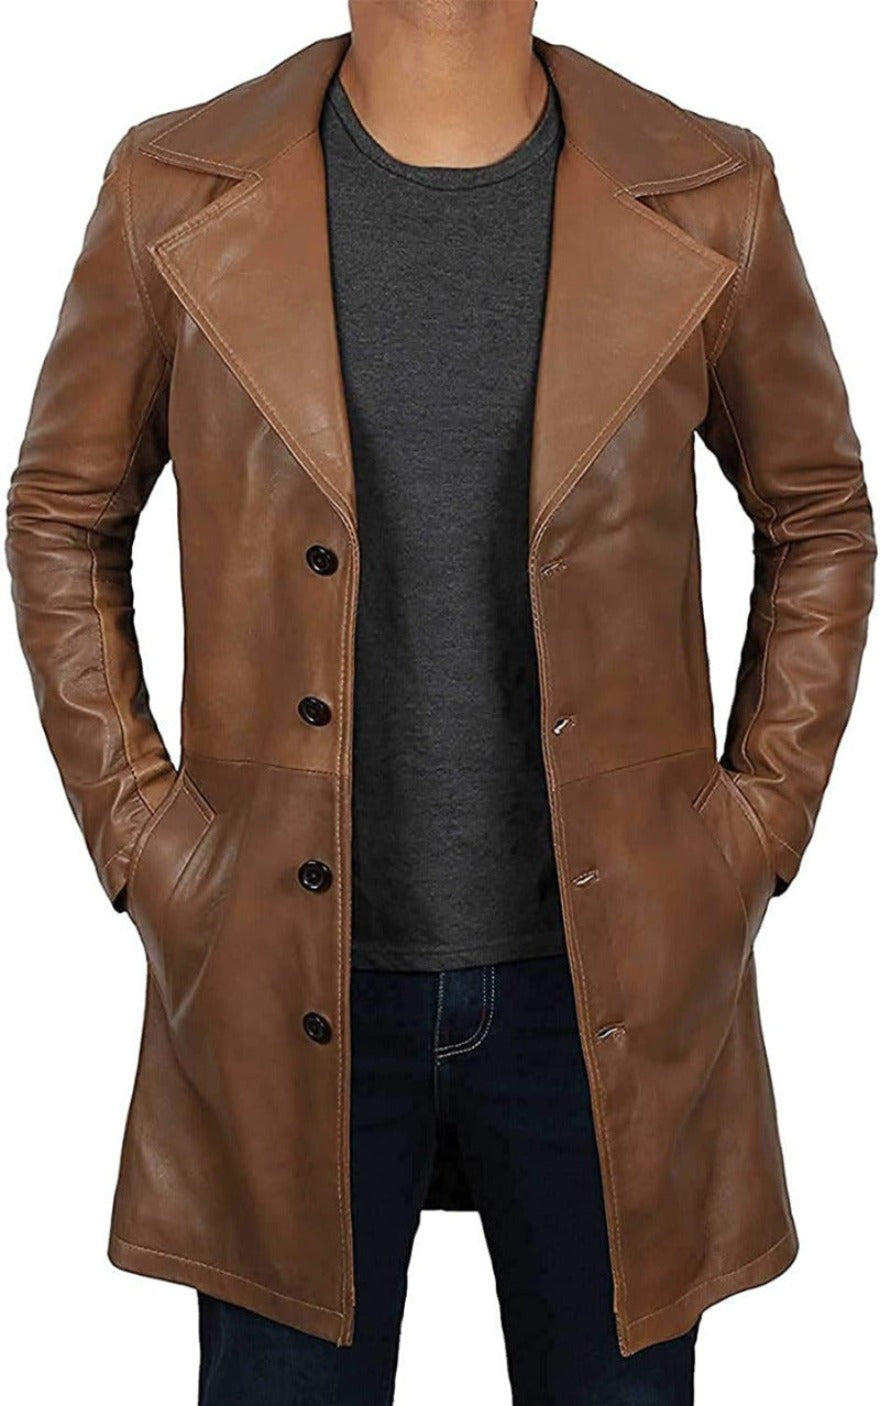 Mens long leather trench coat brown, front  view